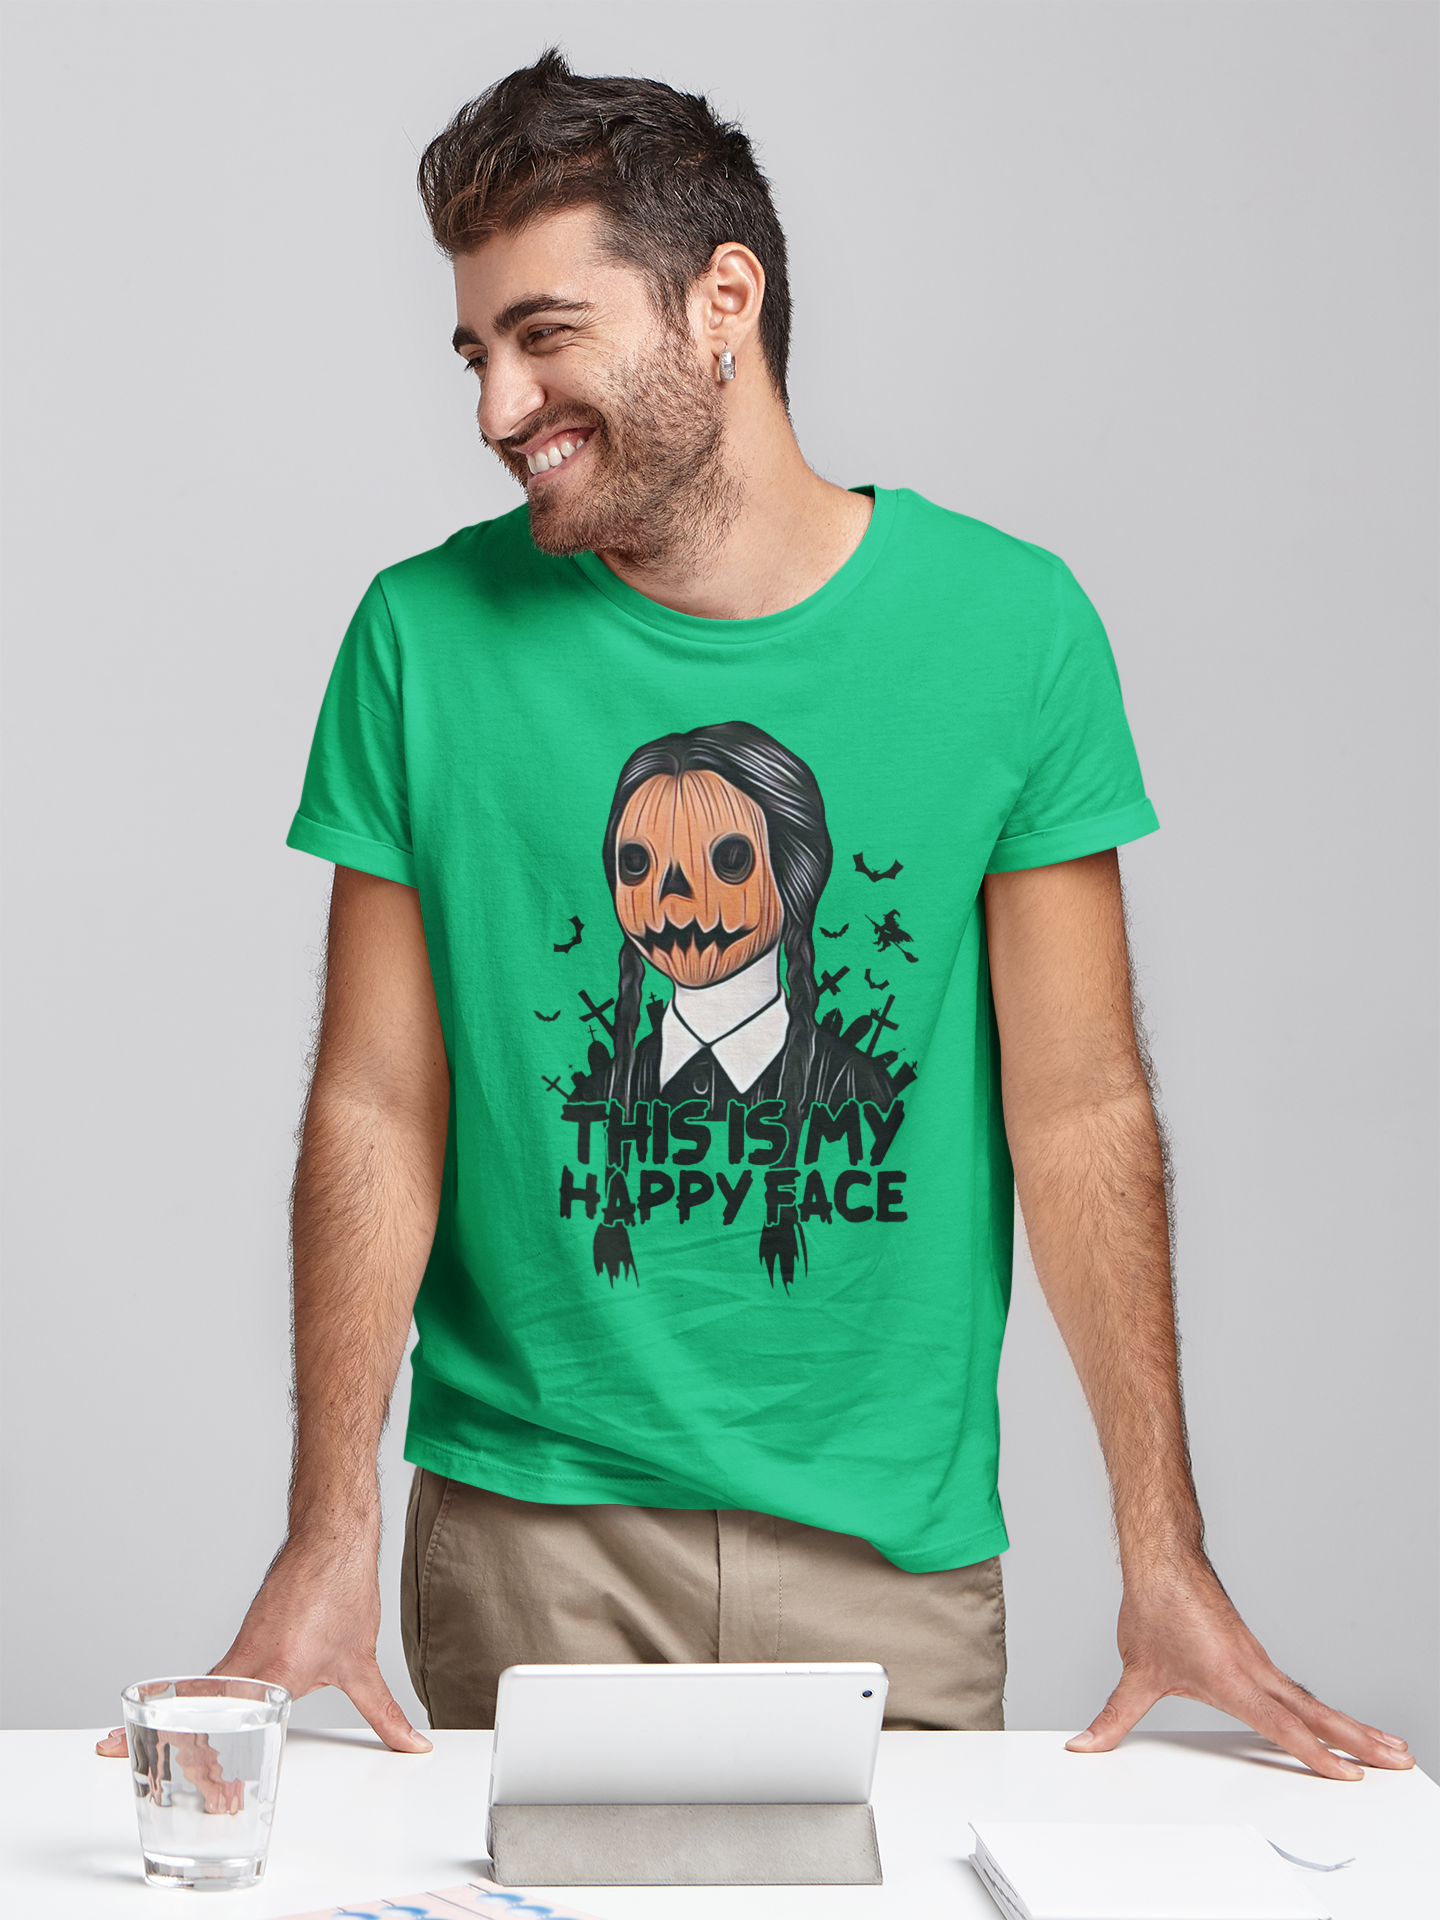 Addams Family T Shirt, Wednesday Addams T Shirt, This Is My Happy Face Tshirt, Halloween Gift